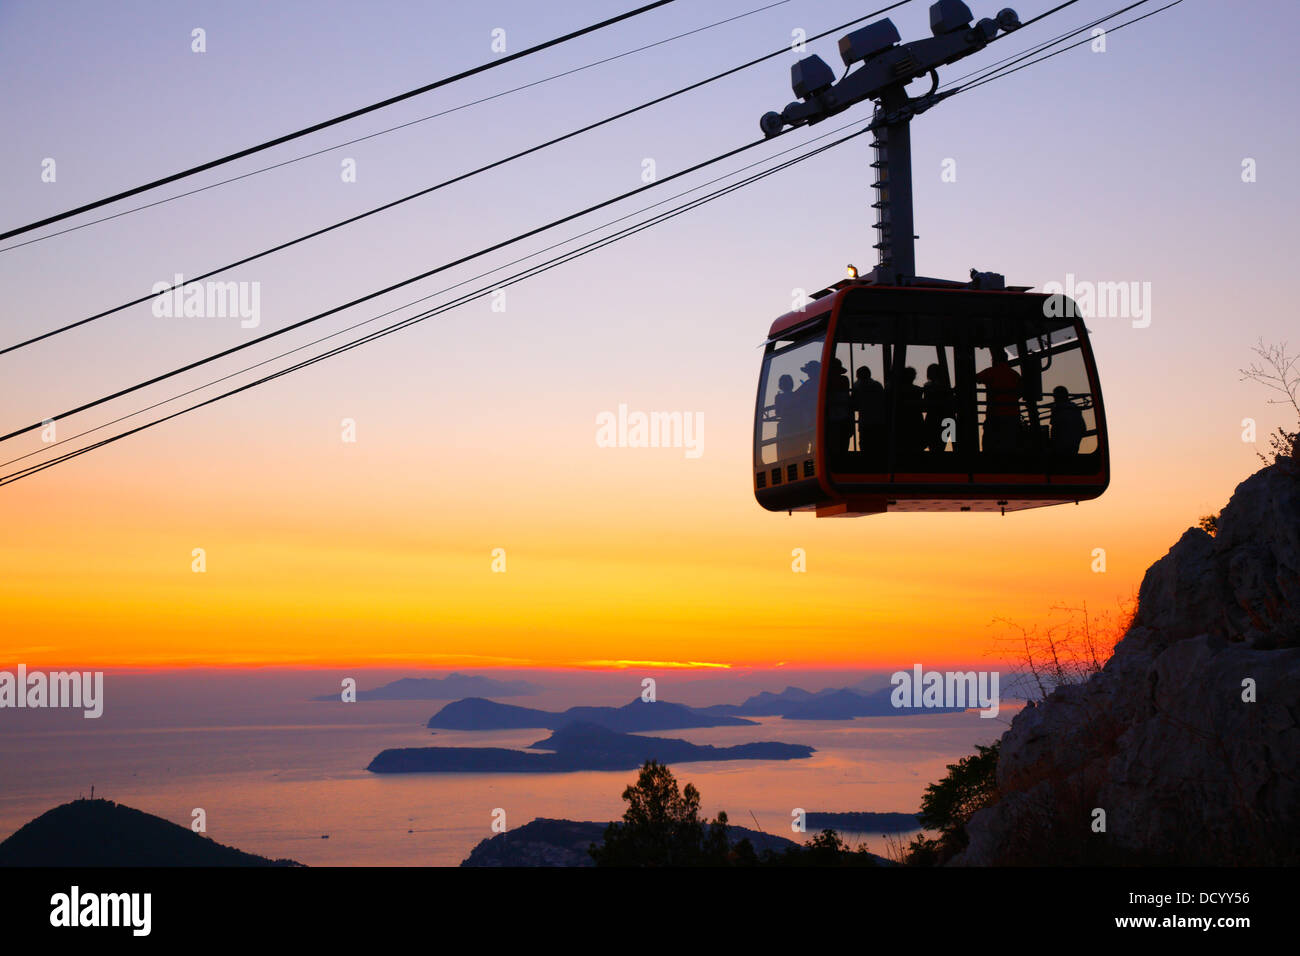 Dubrovnik, Cable car at sunset Stock Photo